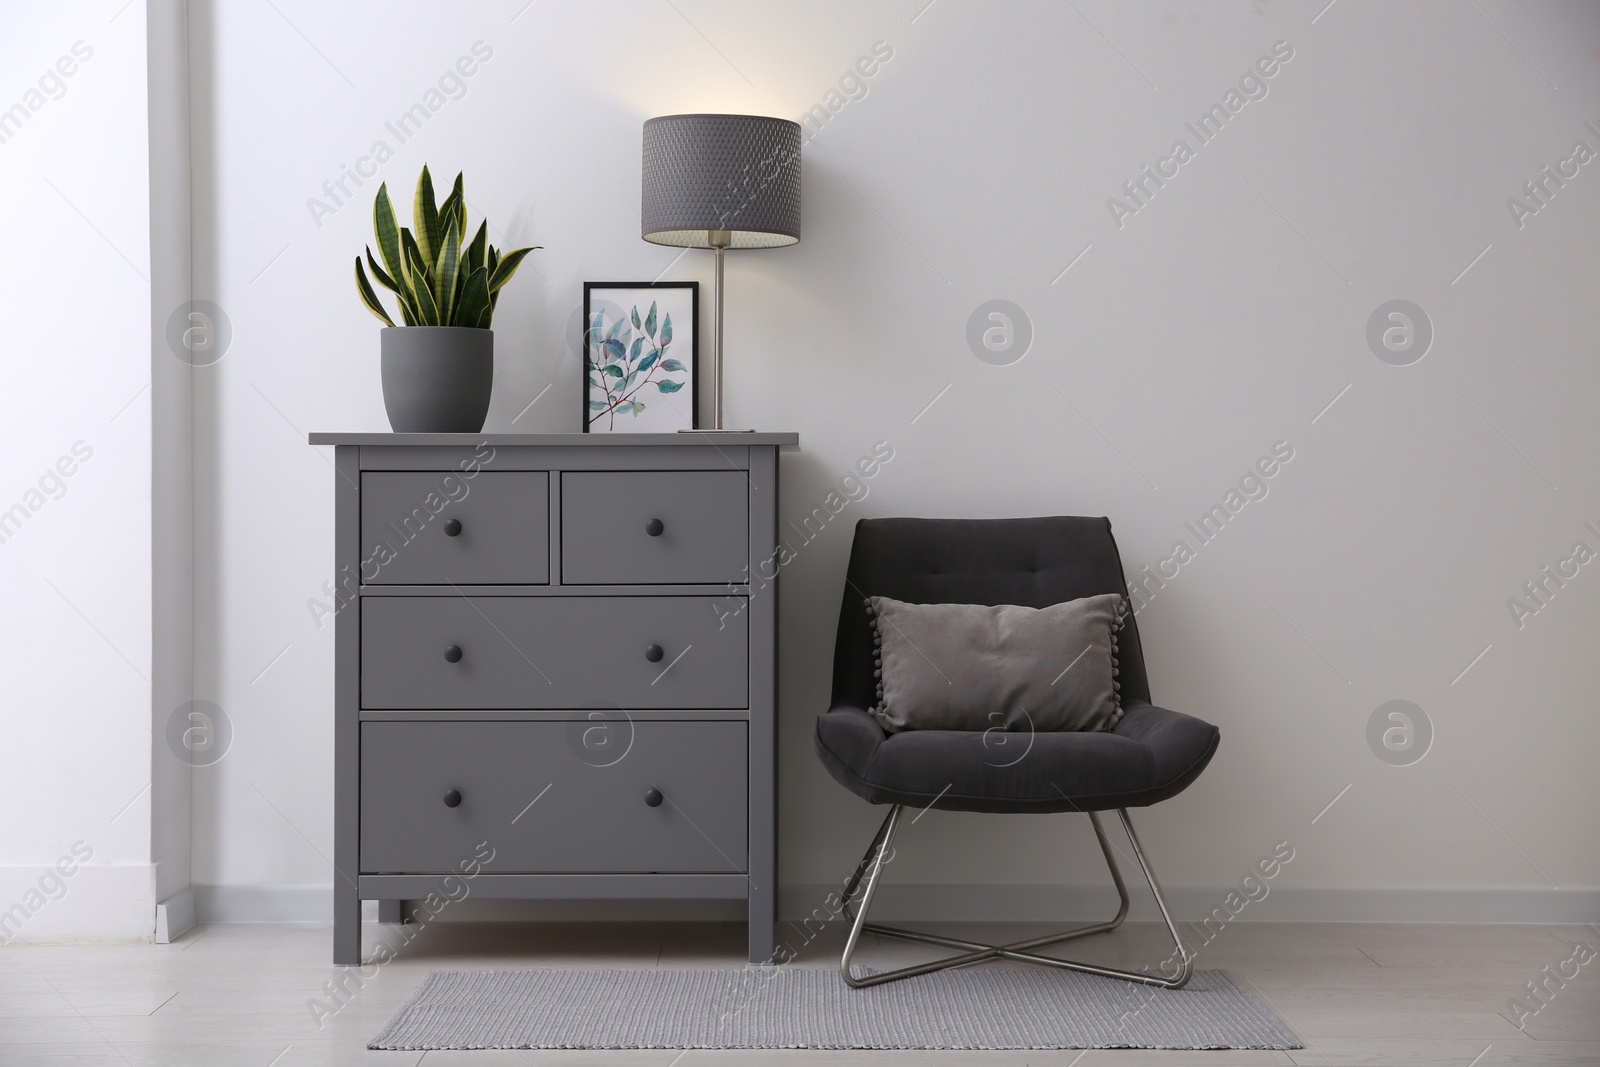 Photo of Grey chest of drawers in stylish room interior